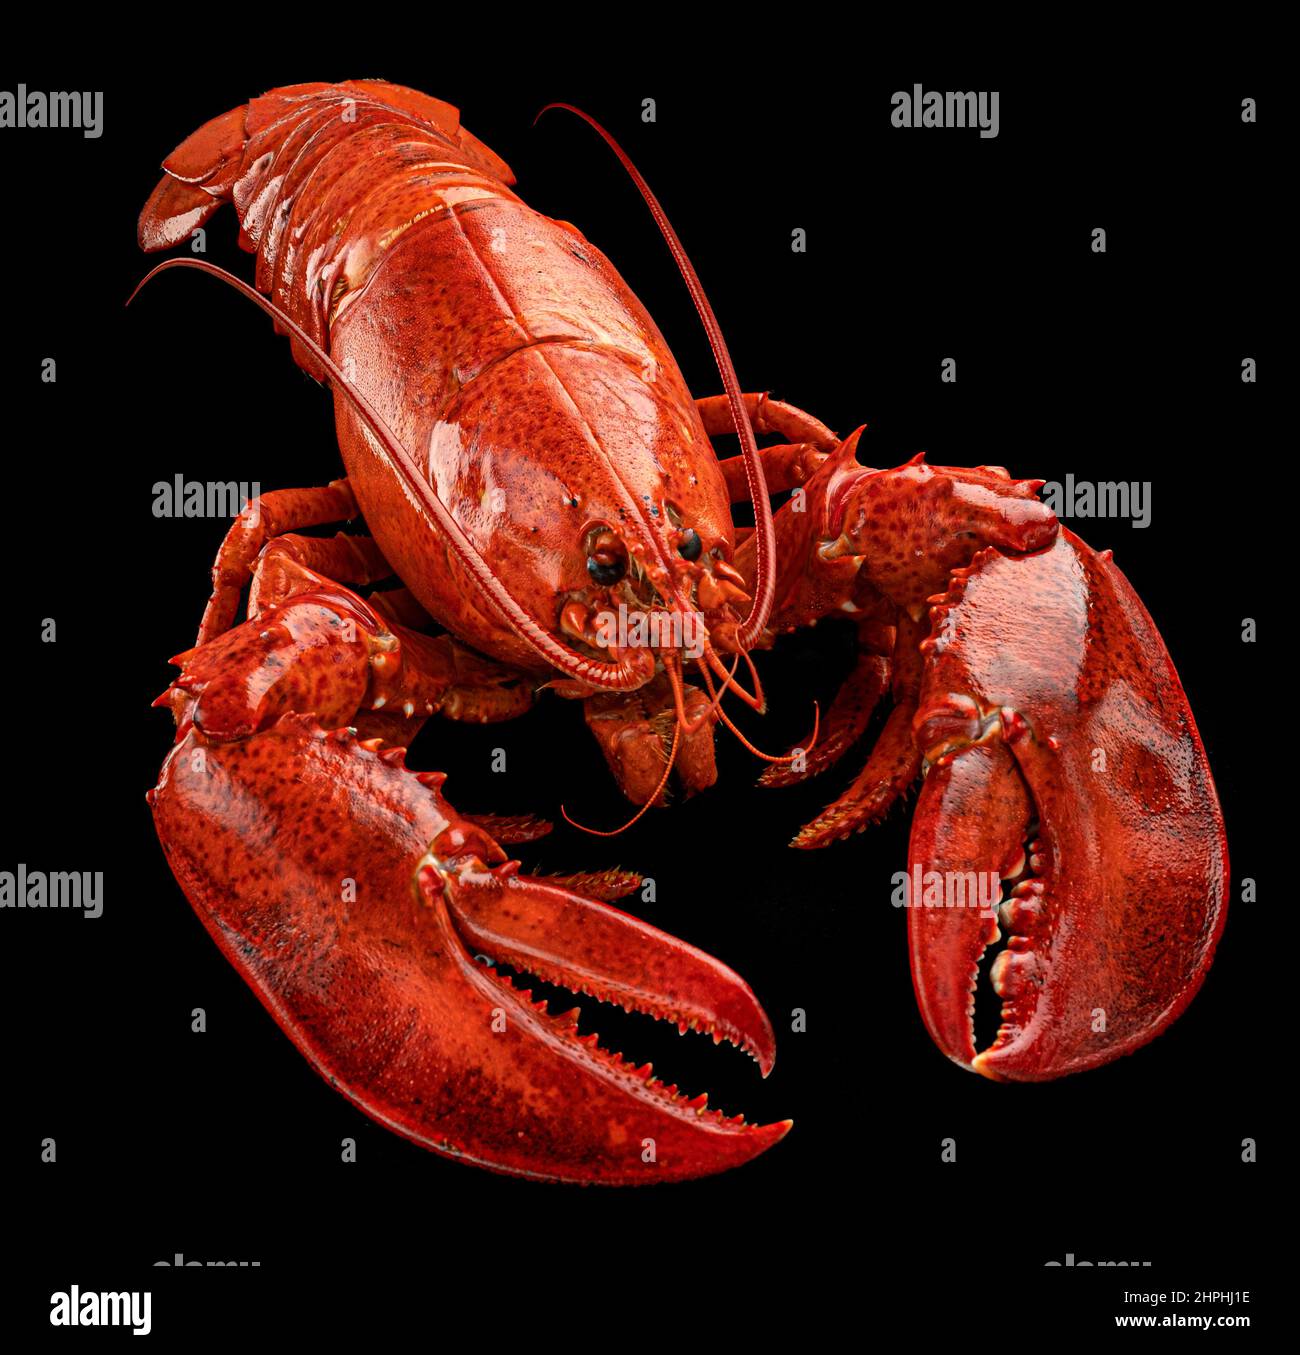 Cooked lobster on black background Stock Photo